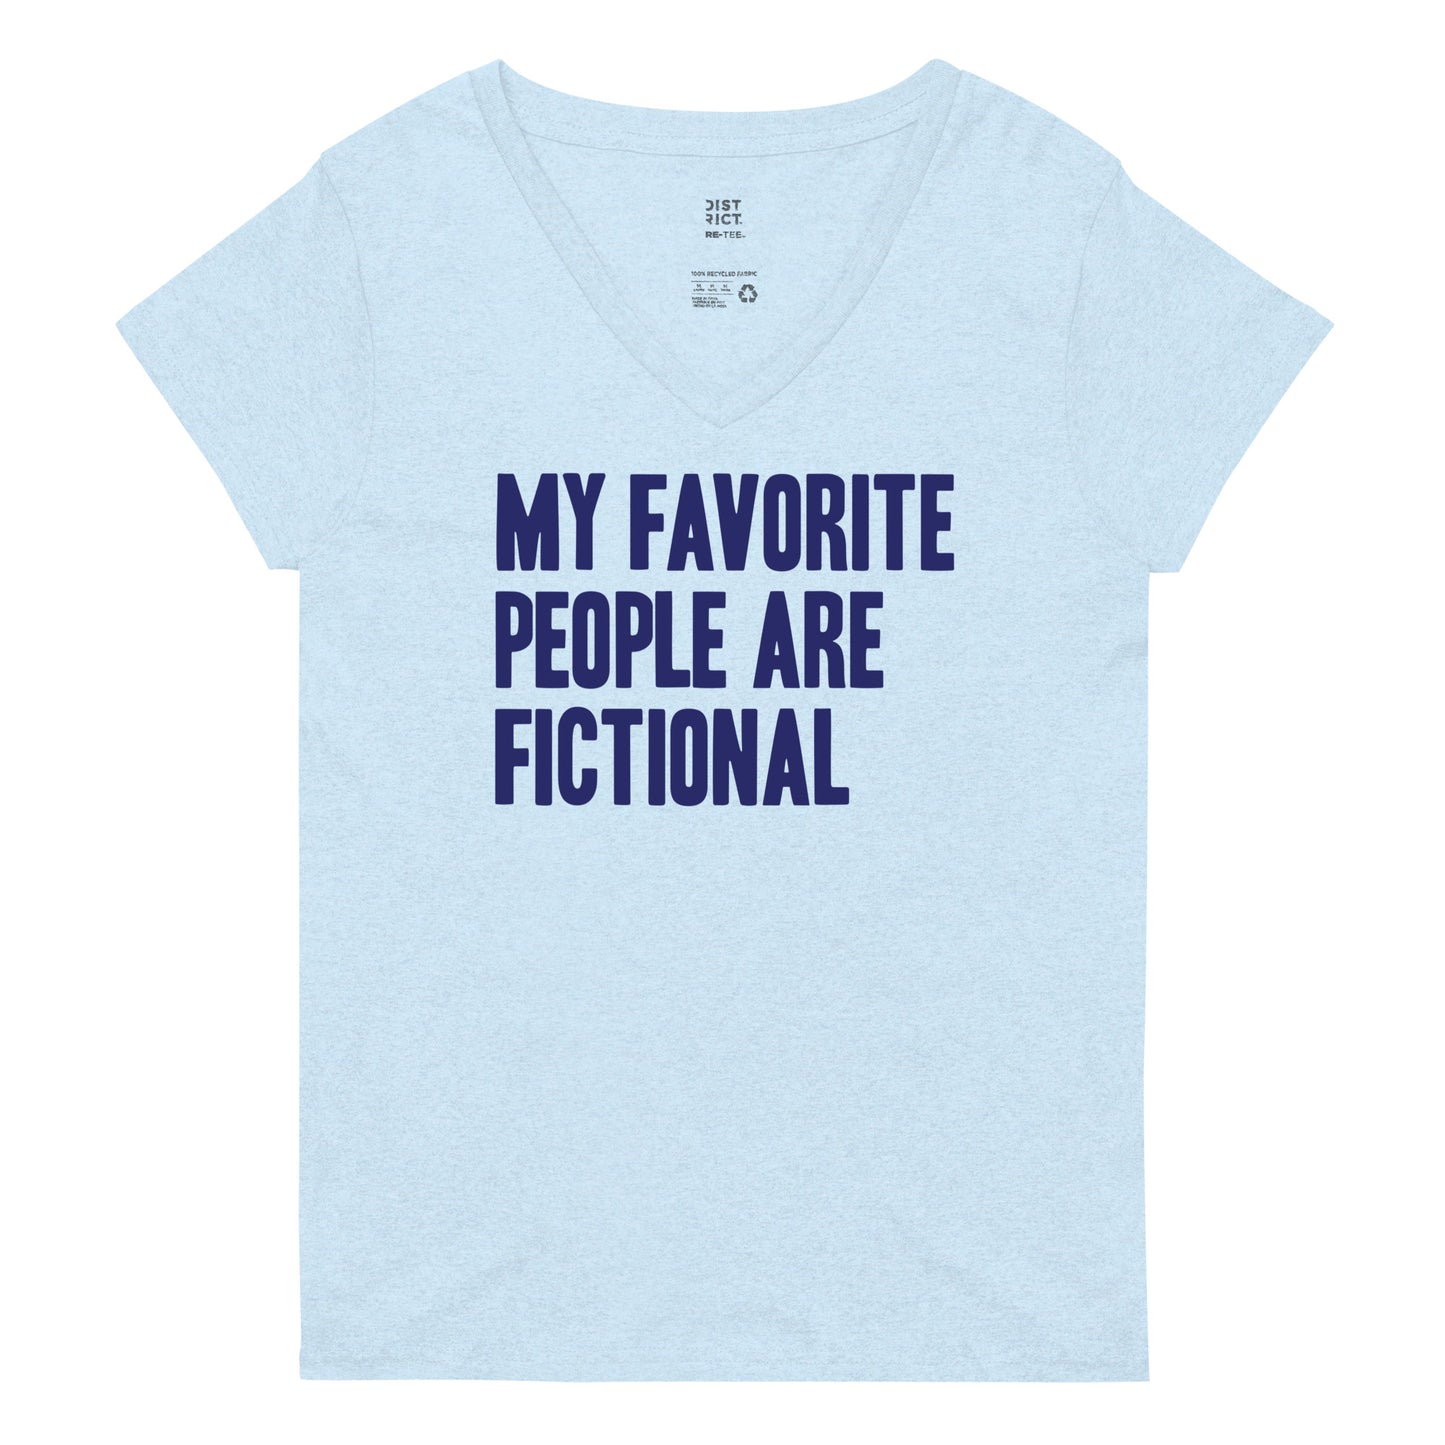 My Favorite People Are Fictional Women's V-Neck Tee